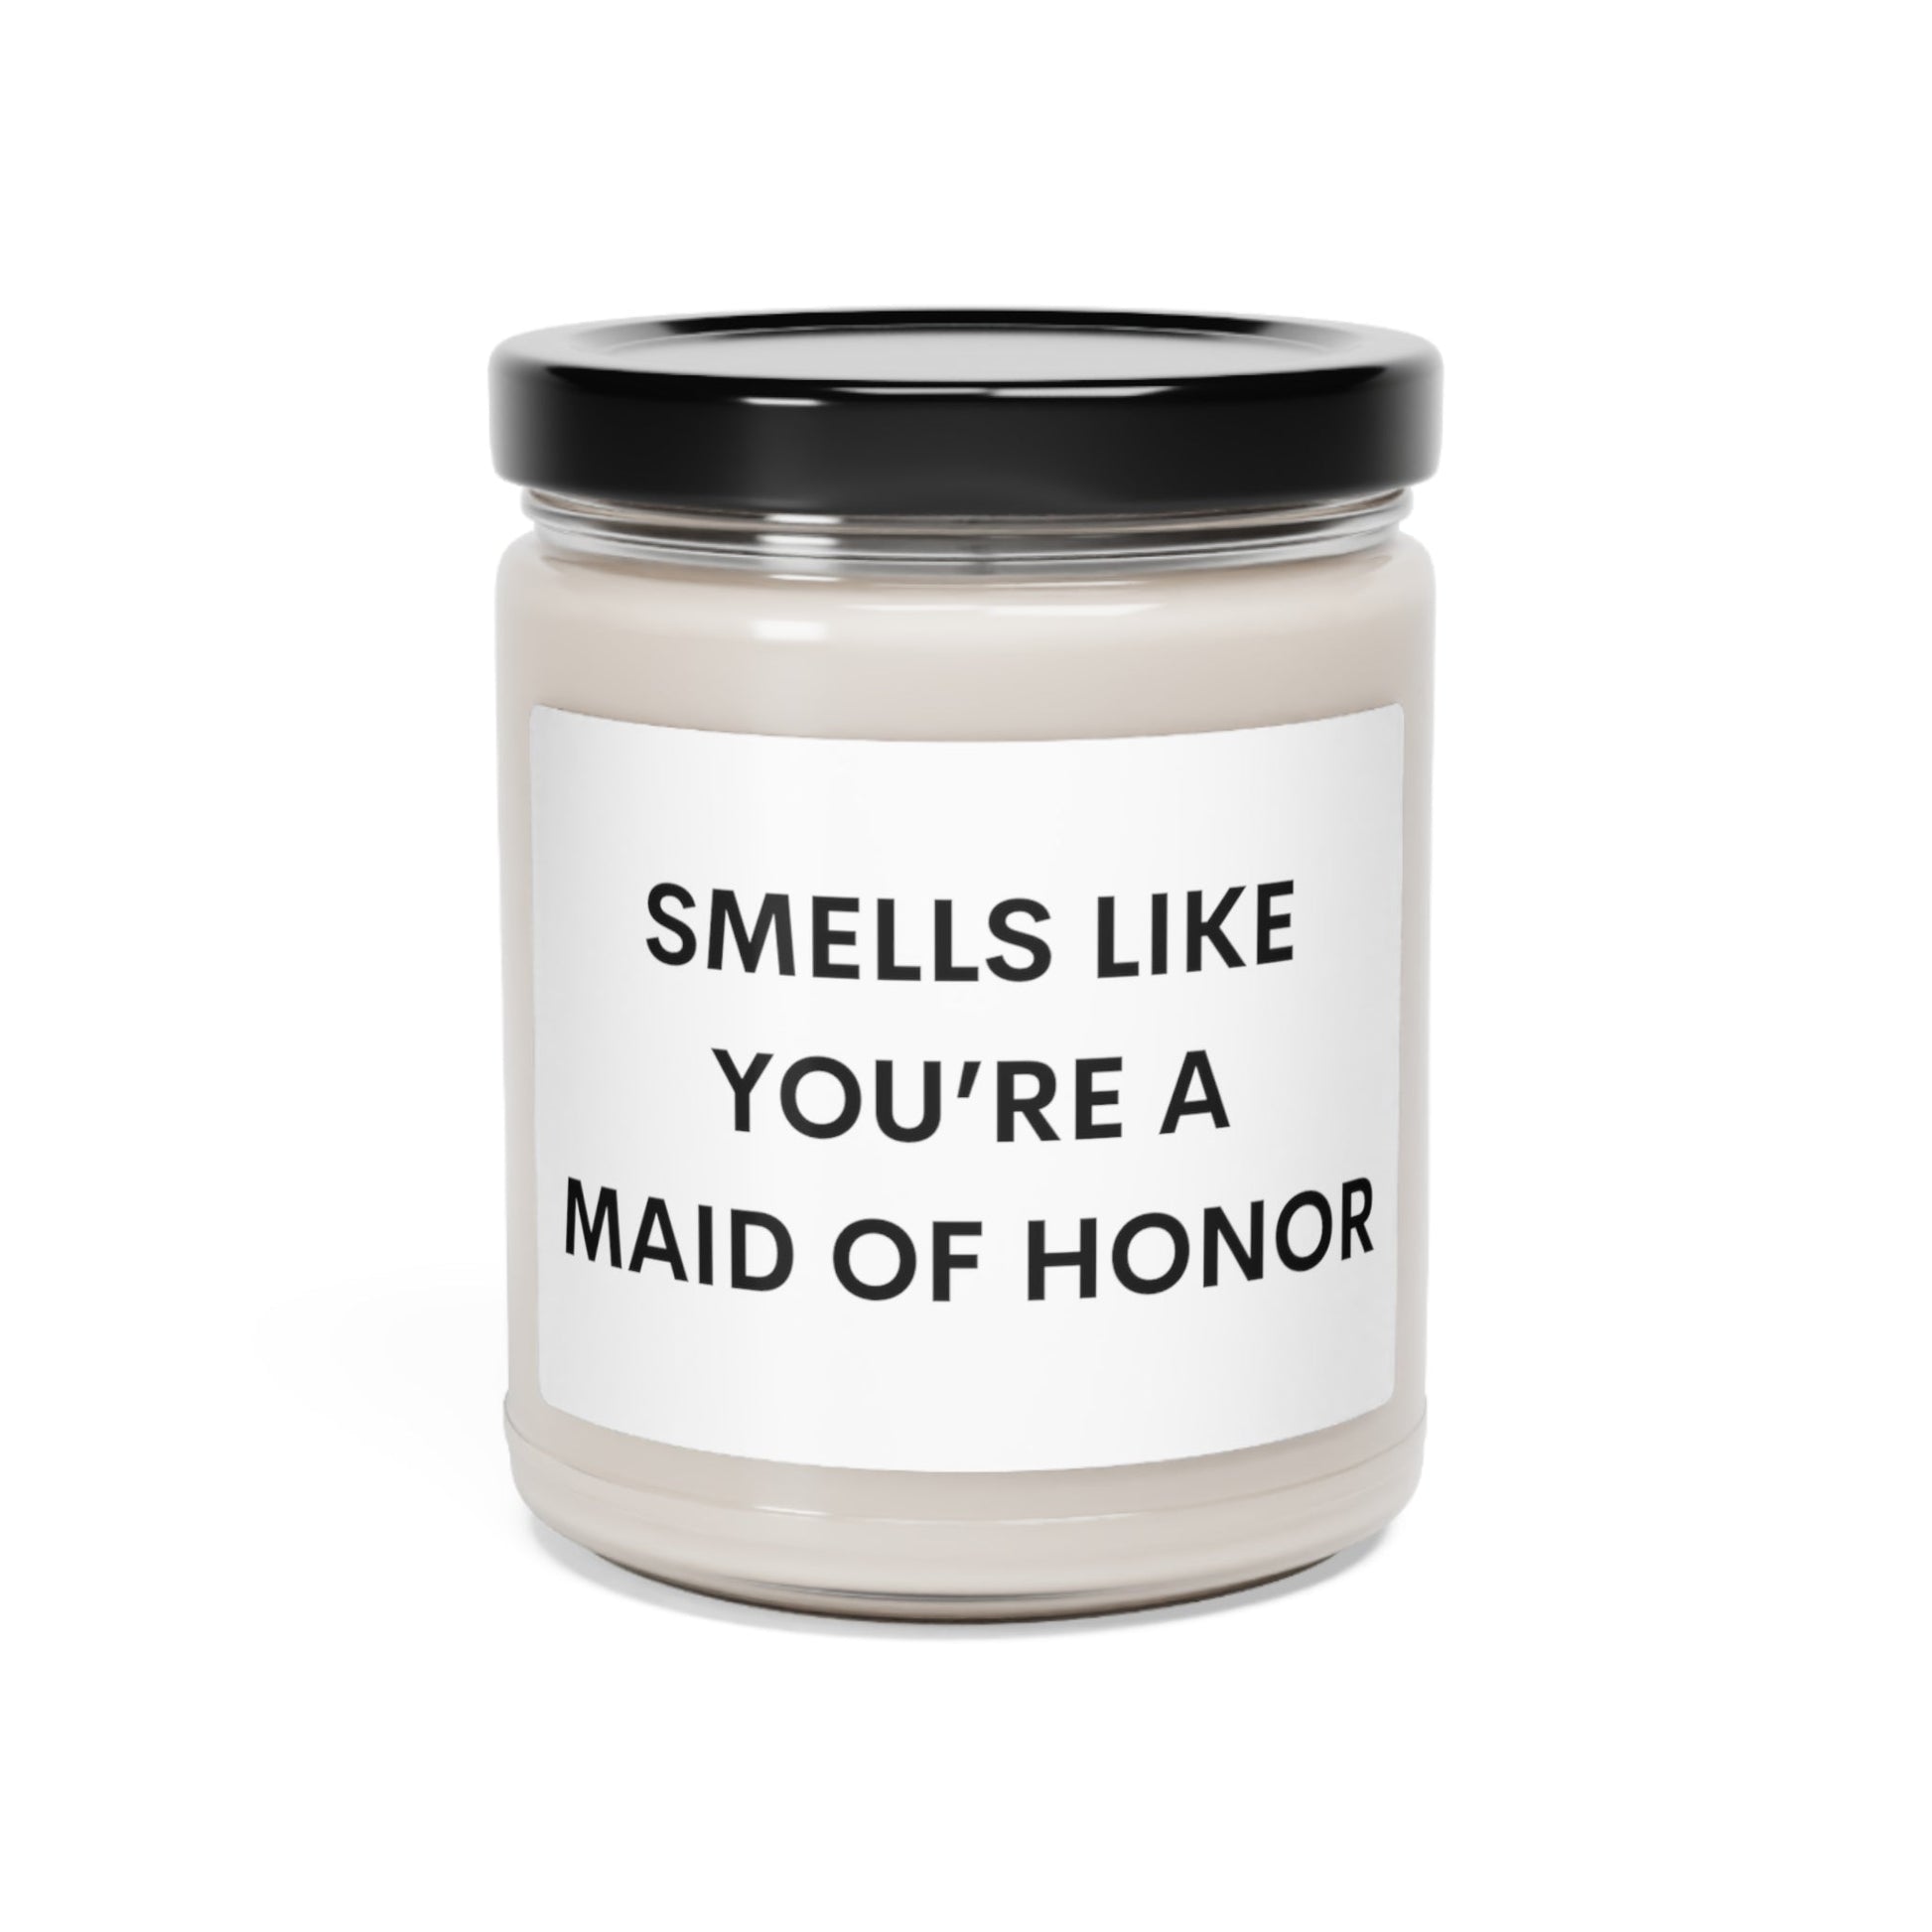 Get trendy with Smells Like you're a Maid of Honor Candle - Home Decor available at Good Gift Company. Grab yours for $21 today!